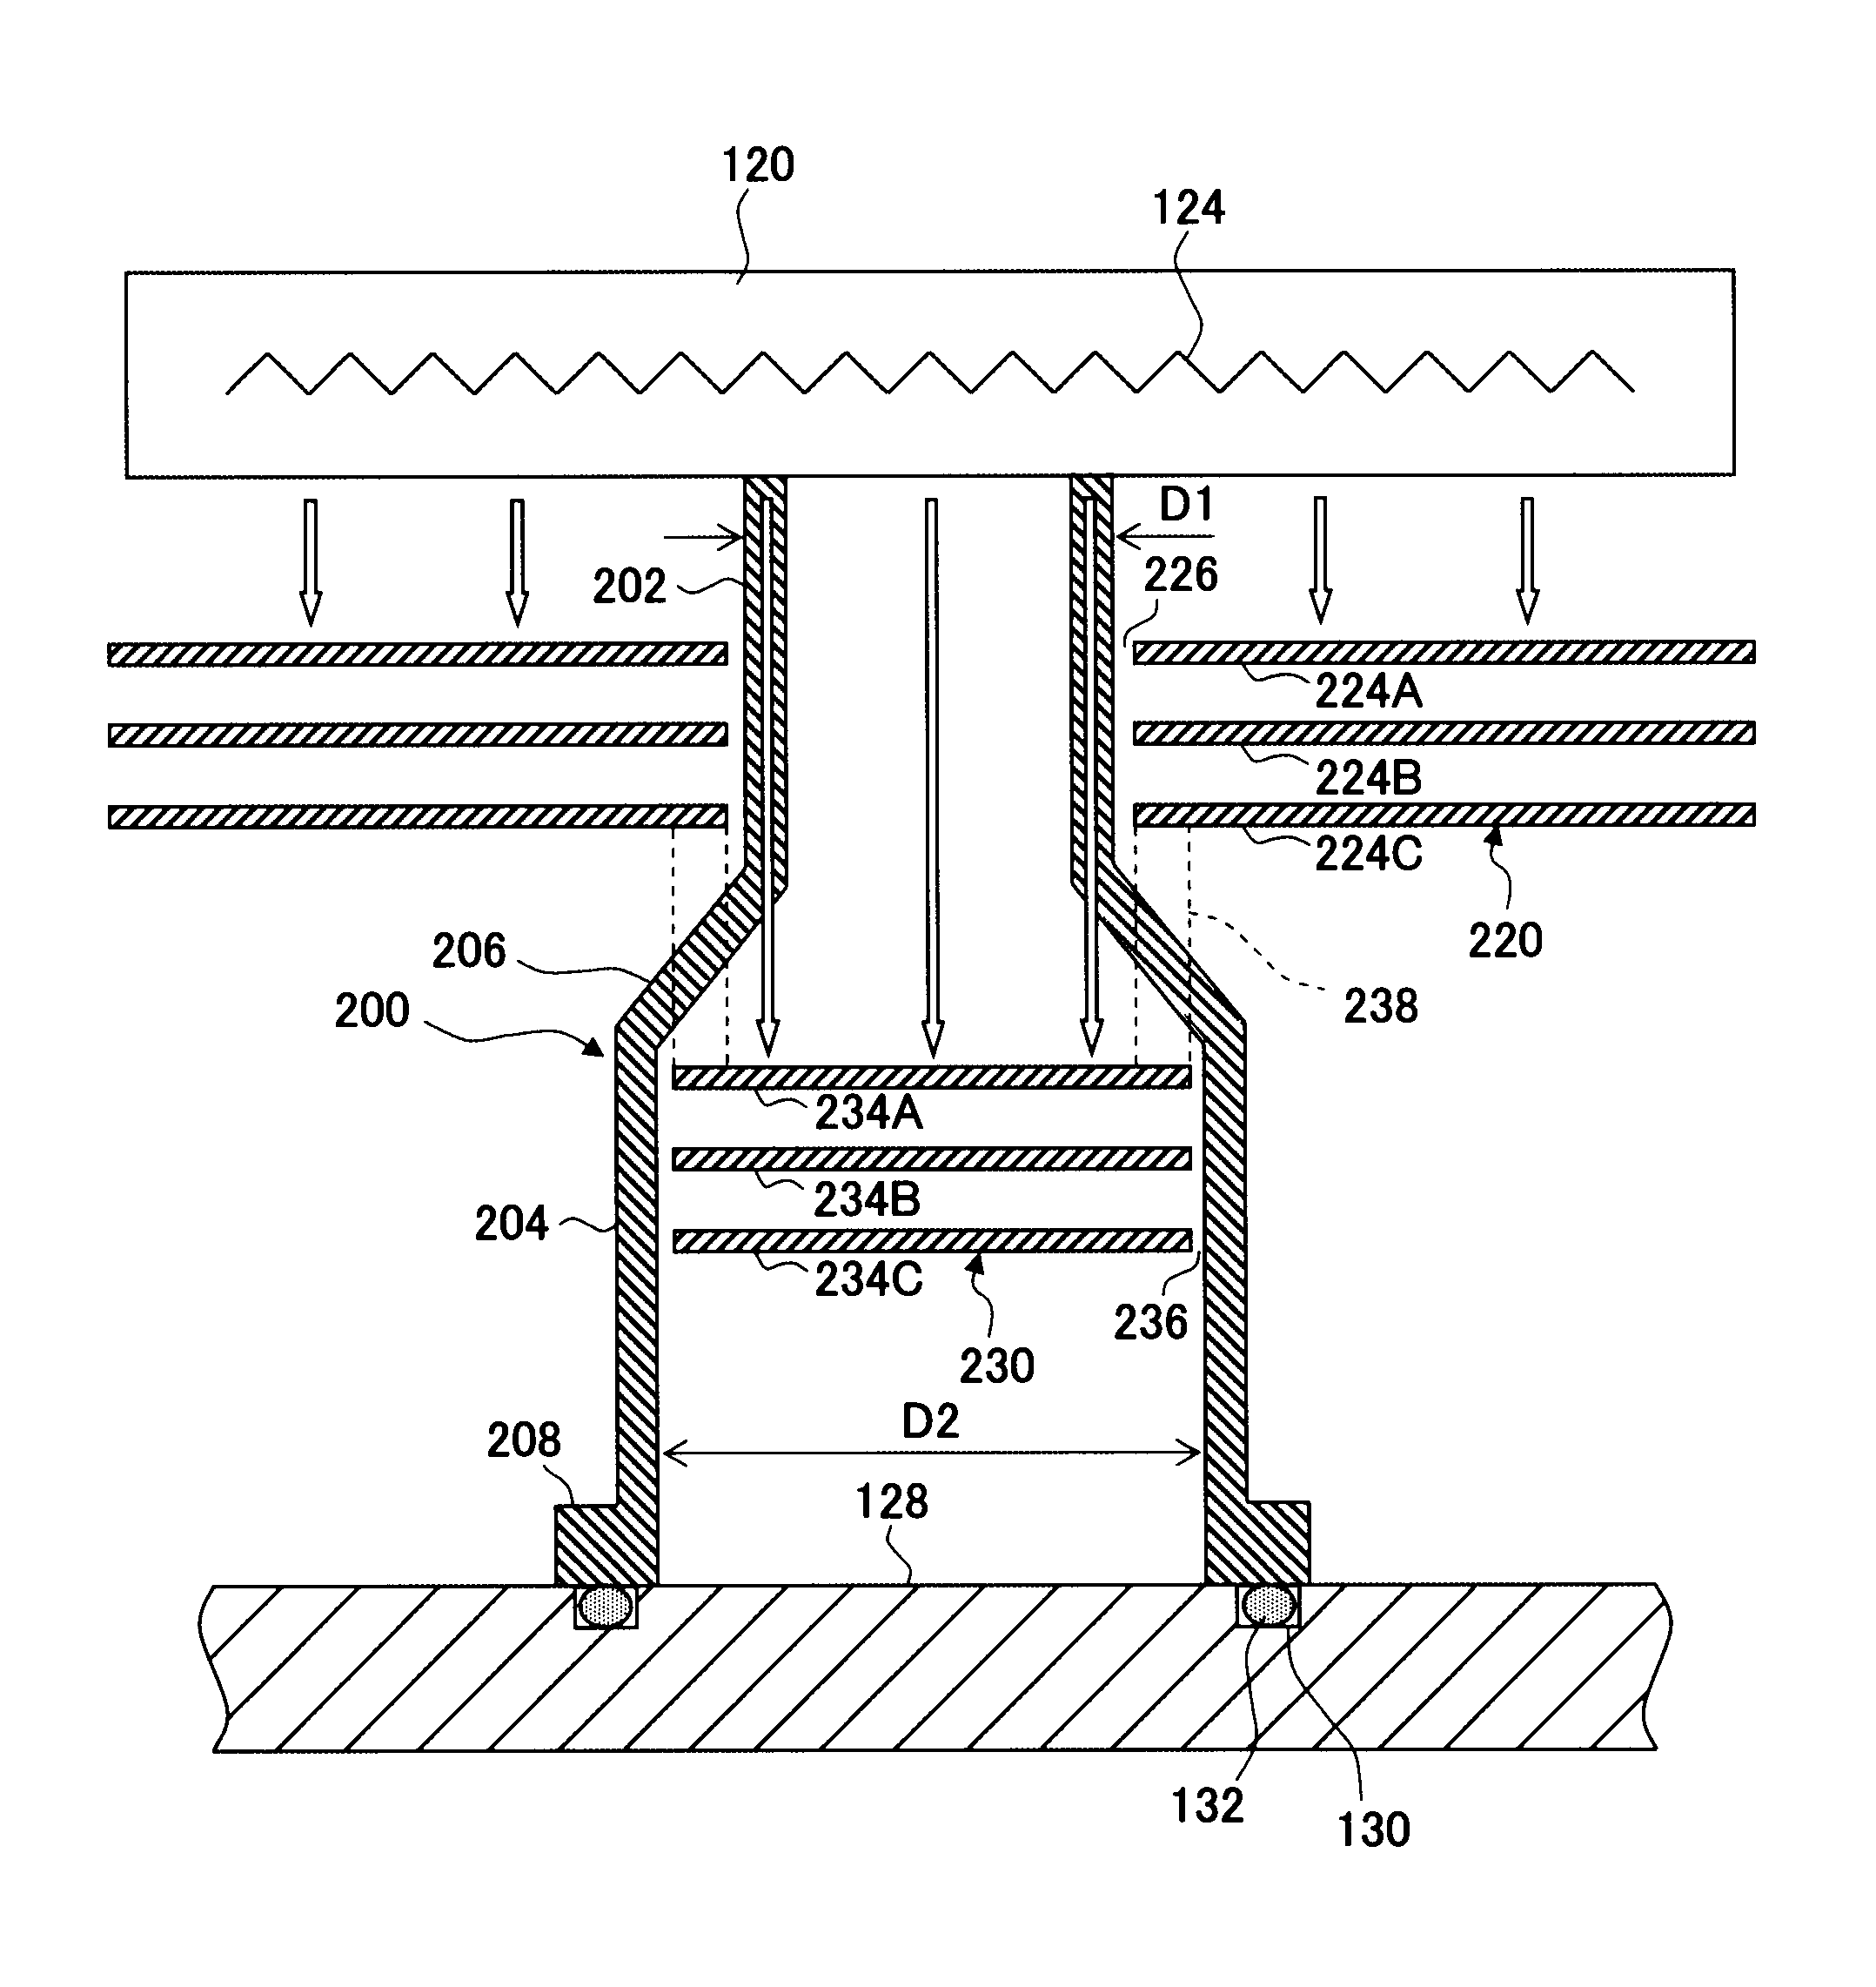 Substrate processing apparatus and substrate stage used therein